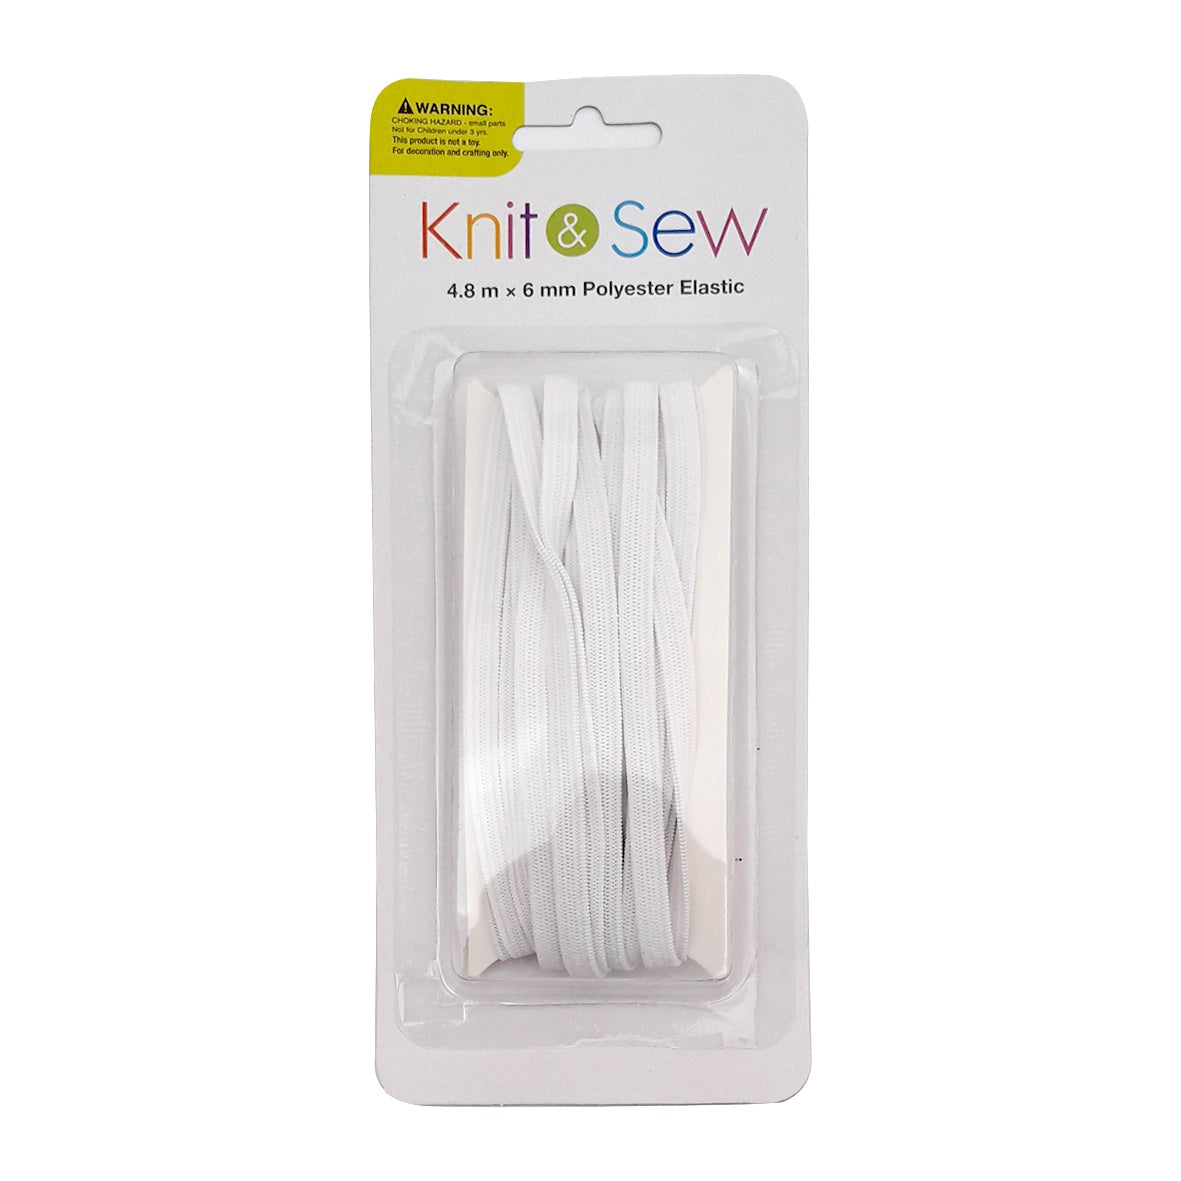 Knit & Sew Polyester Elastic 6mm x 4.8m